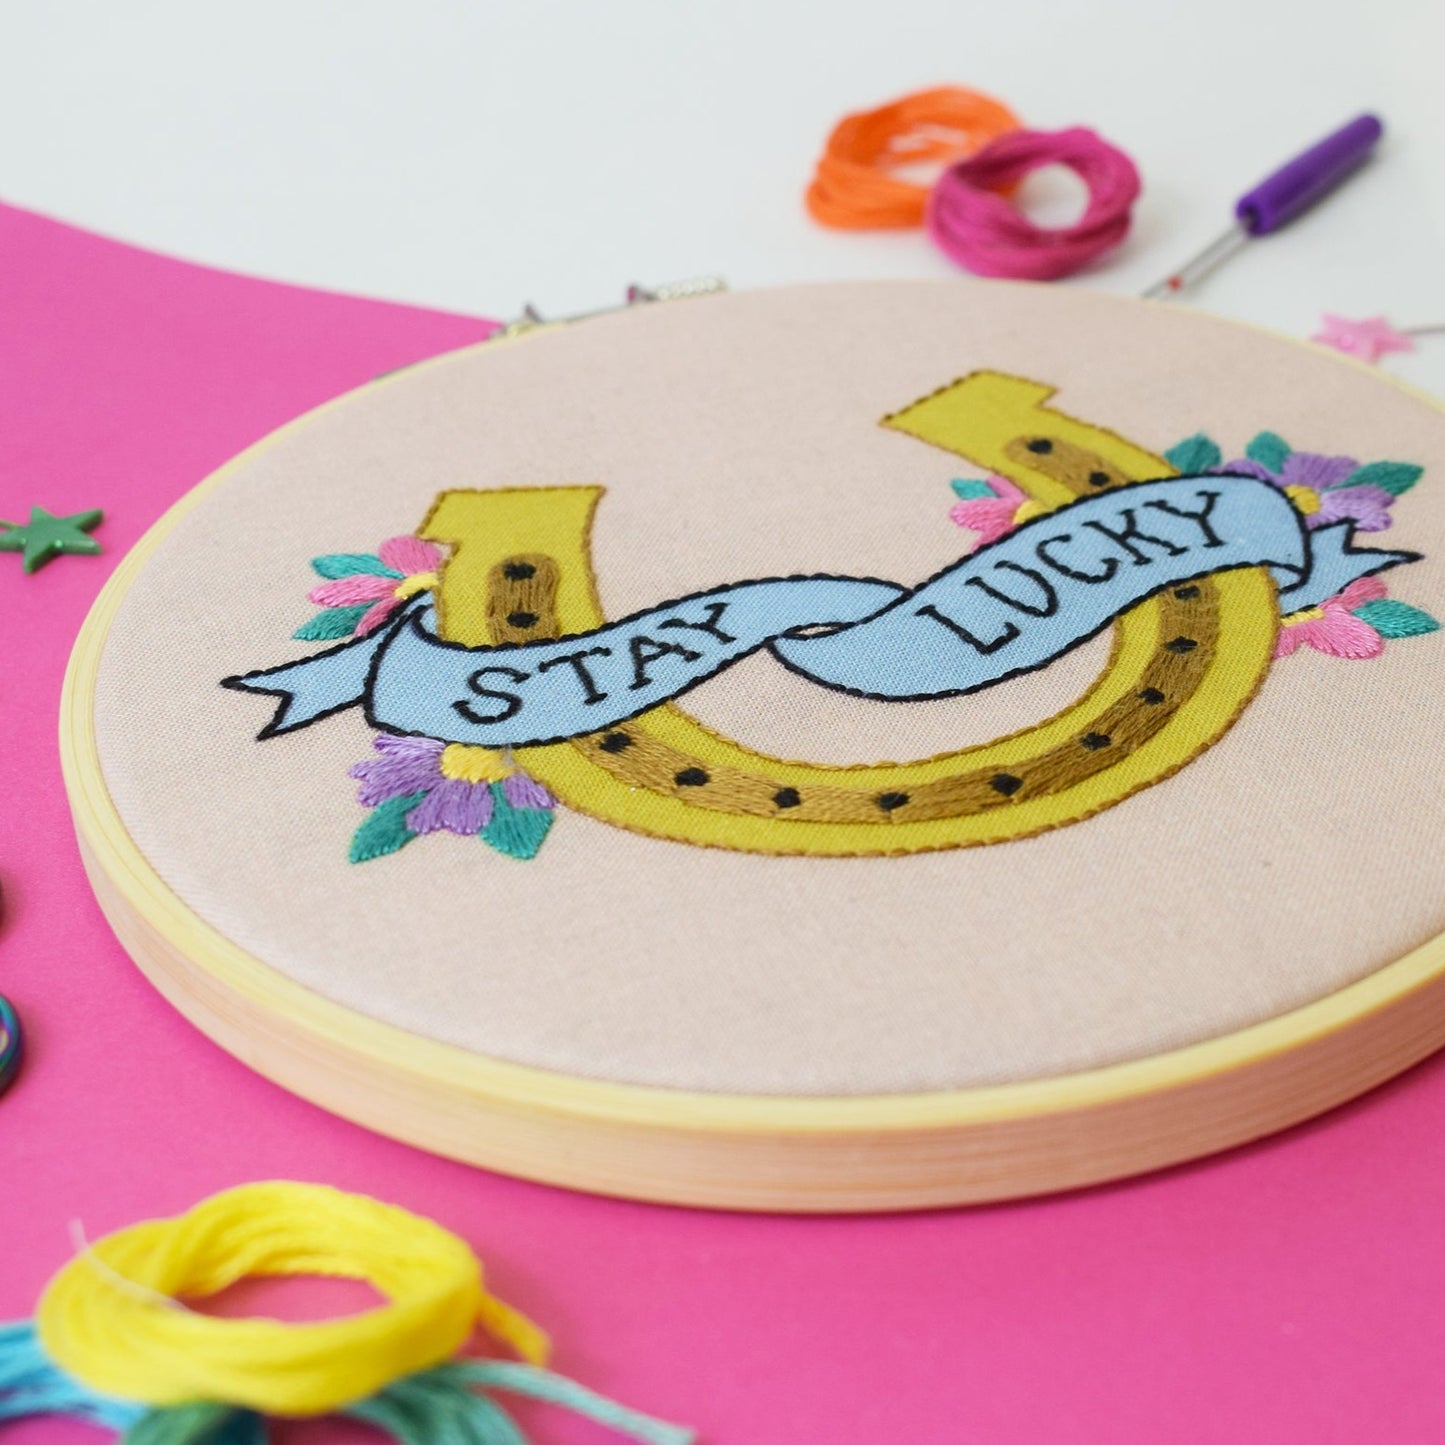 'Stay Lucky' Large Embroidery Craft Kit